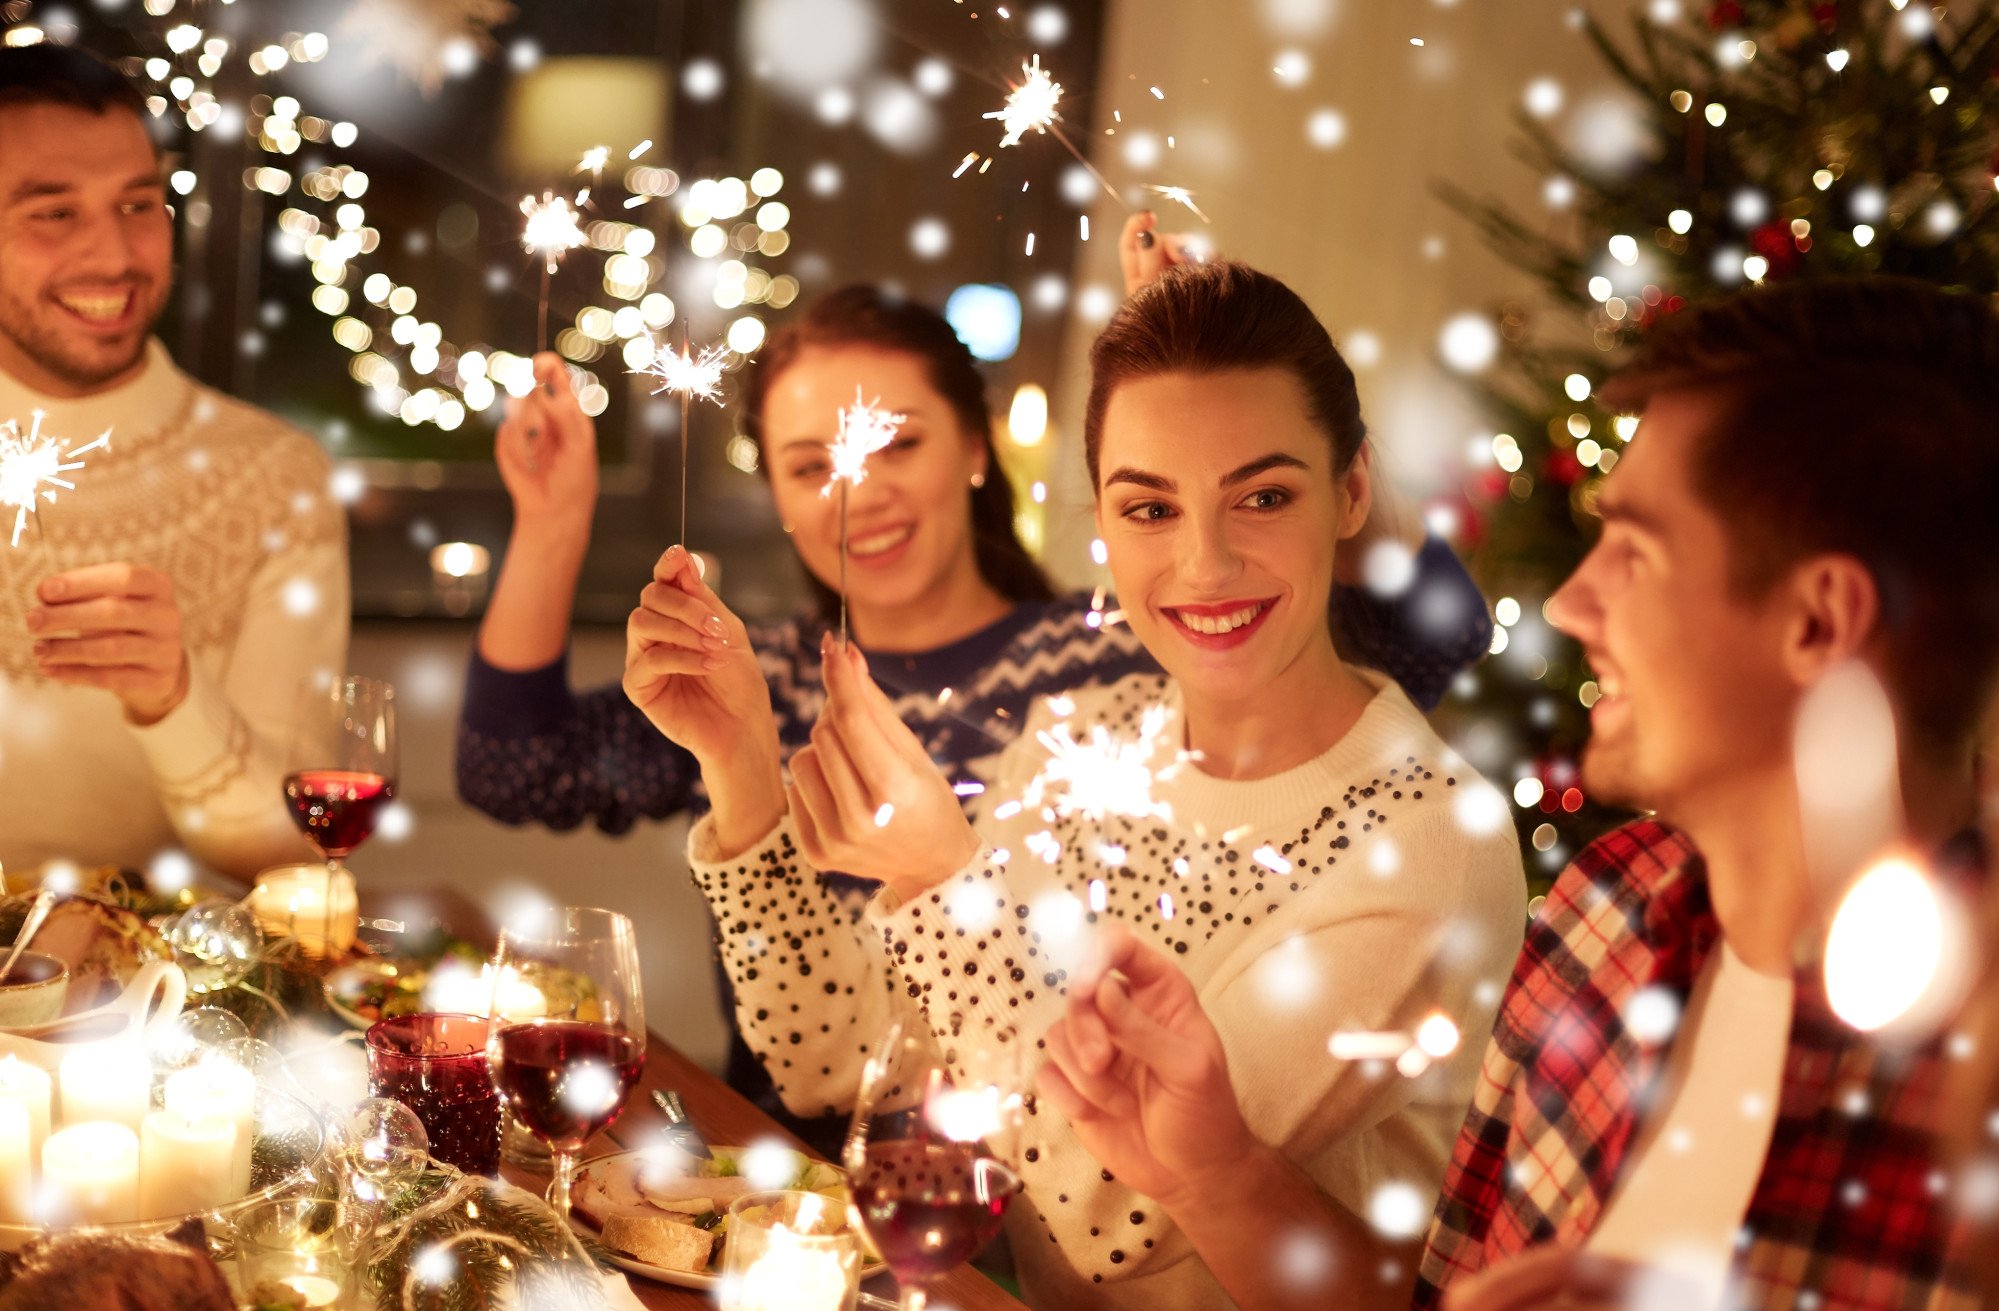 The Best Ways To Avoid Drinking Alcohol Or Not Binge Drink During Holiday Parties And How To